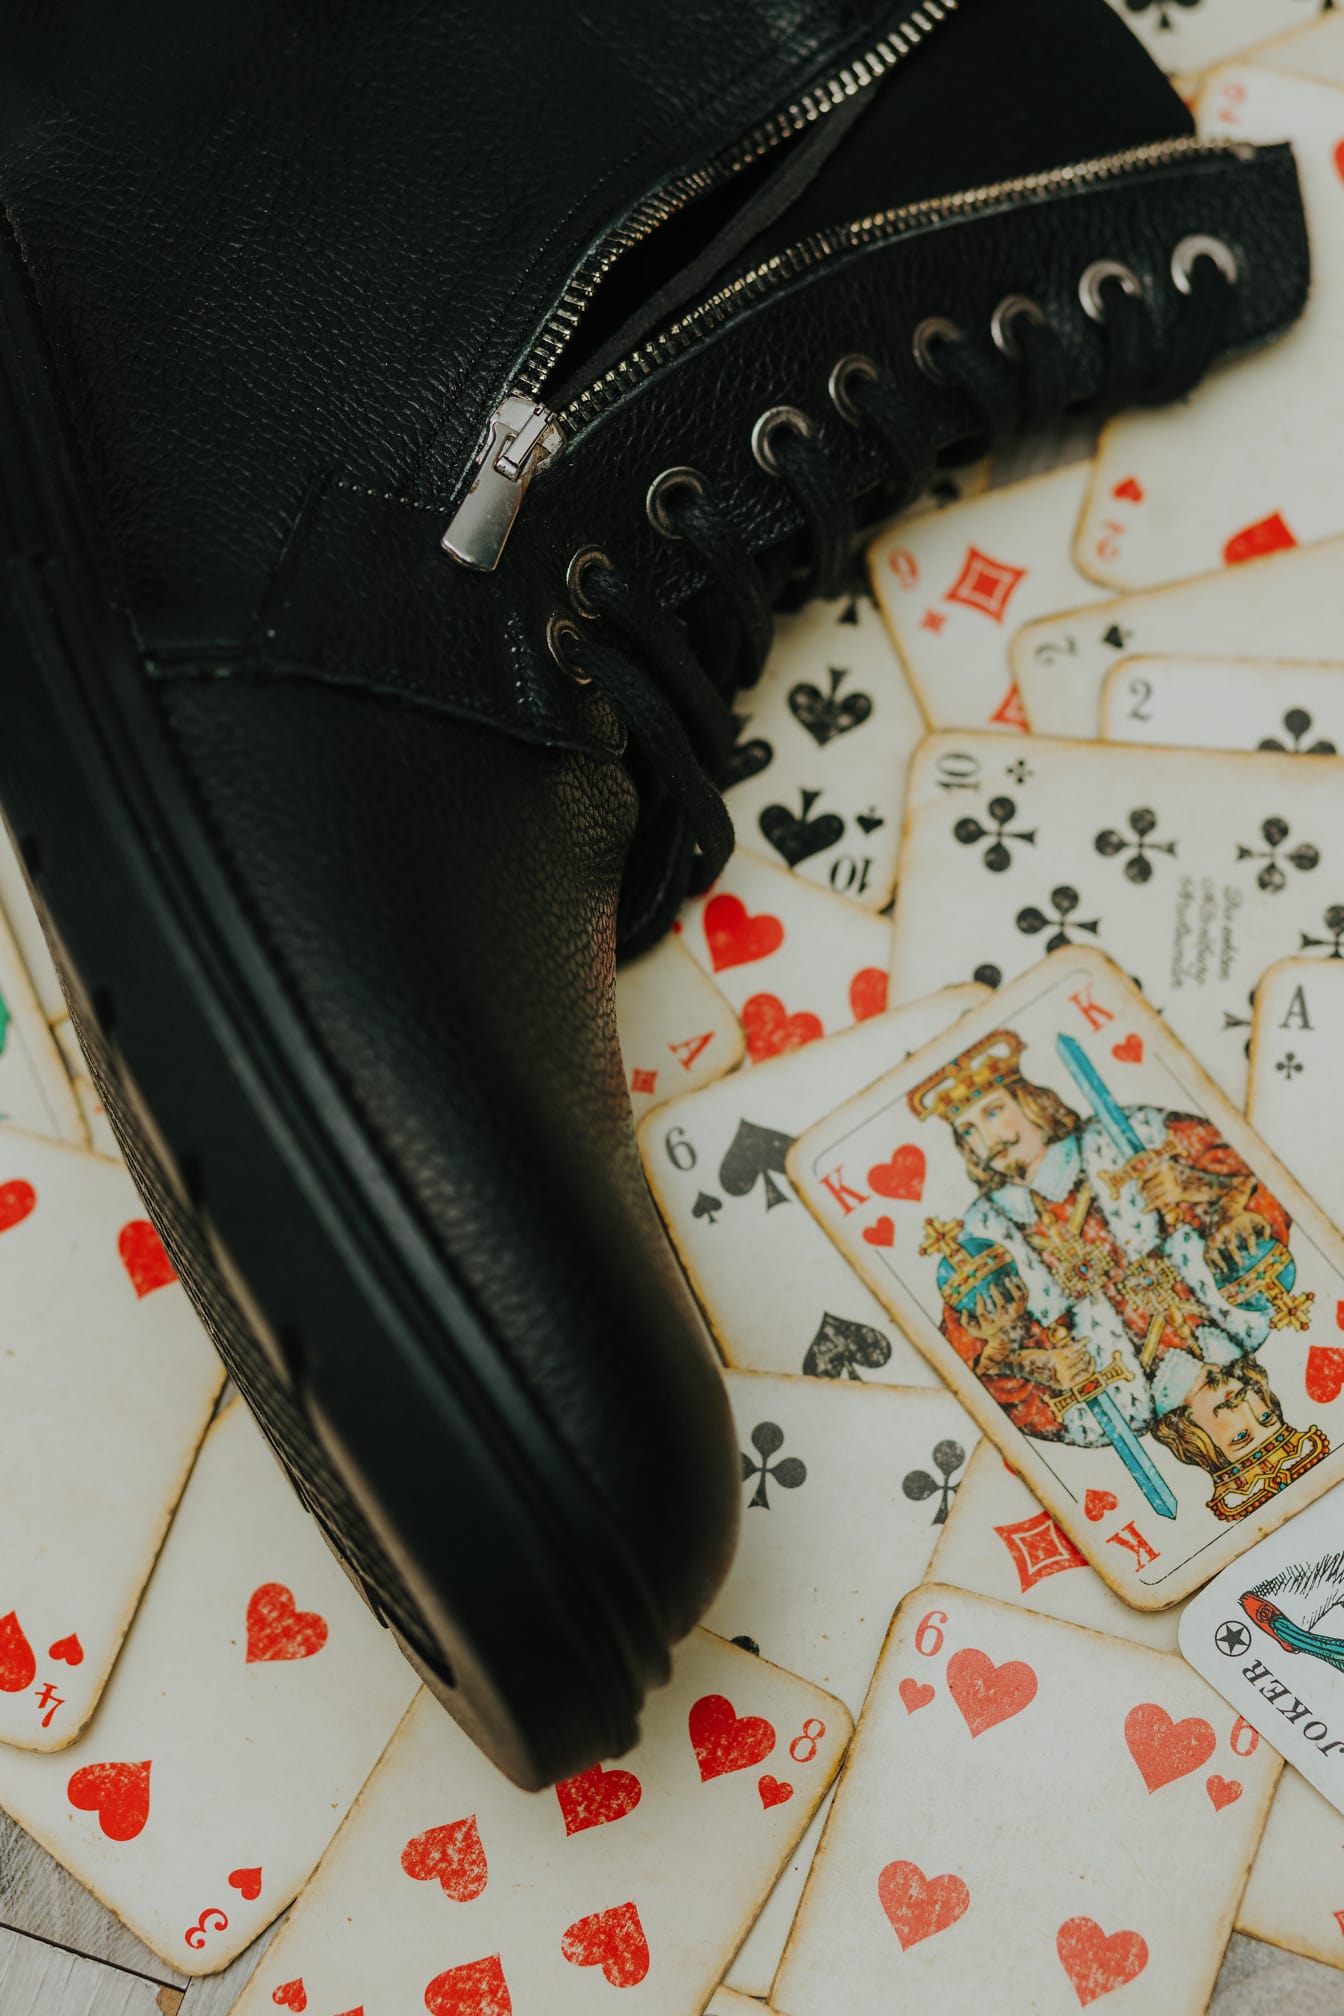 Black leather boot on old fashioned playing card